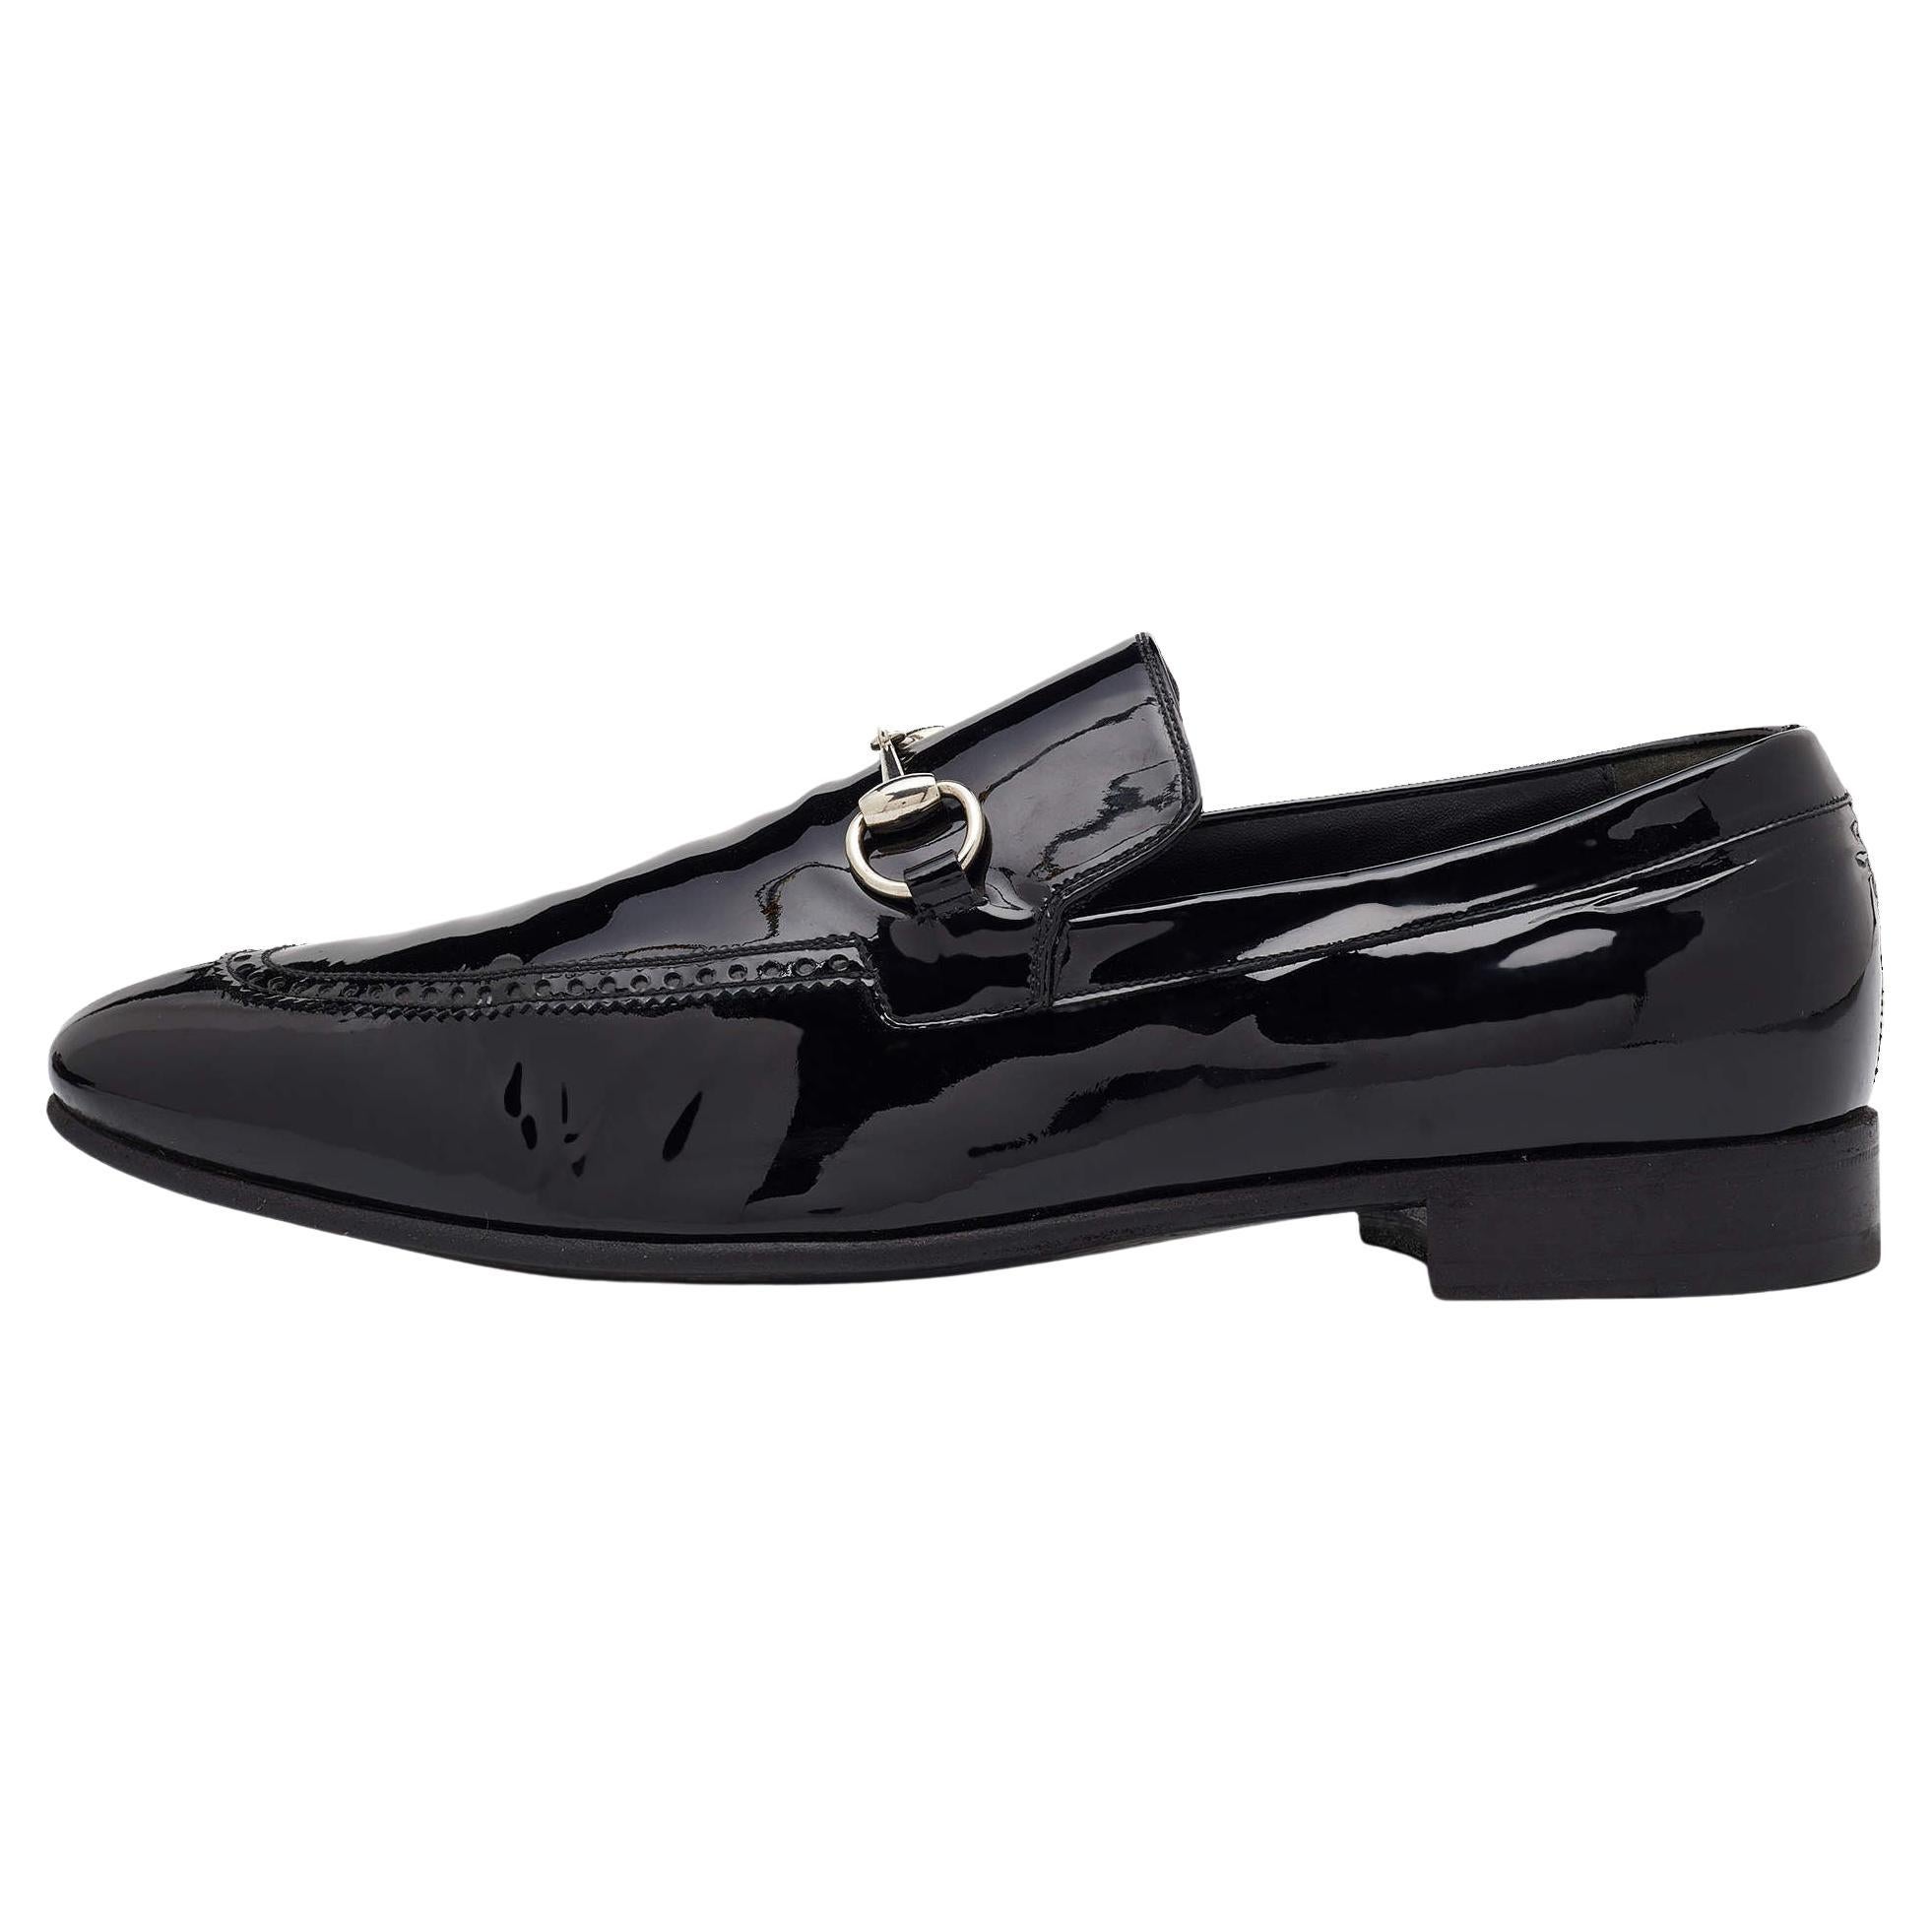 Gucci Black Patent Leather Horsebit Slip On Loafers Size 44